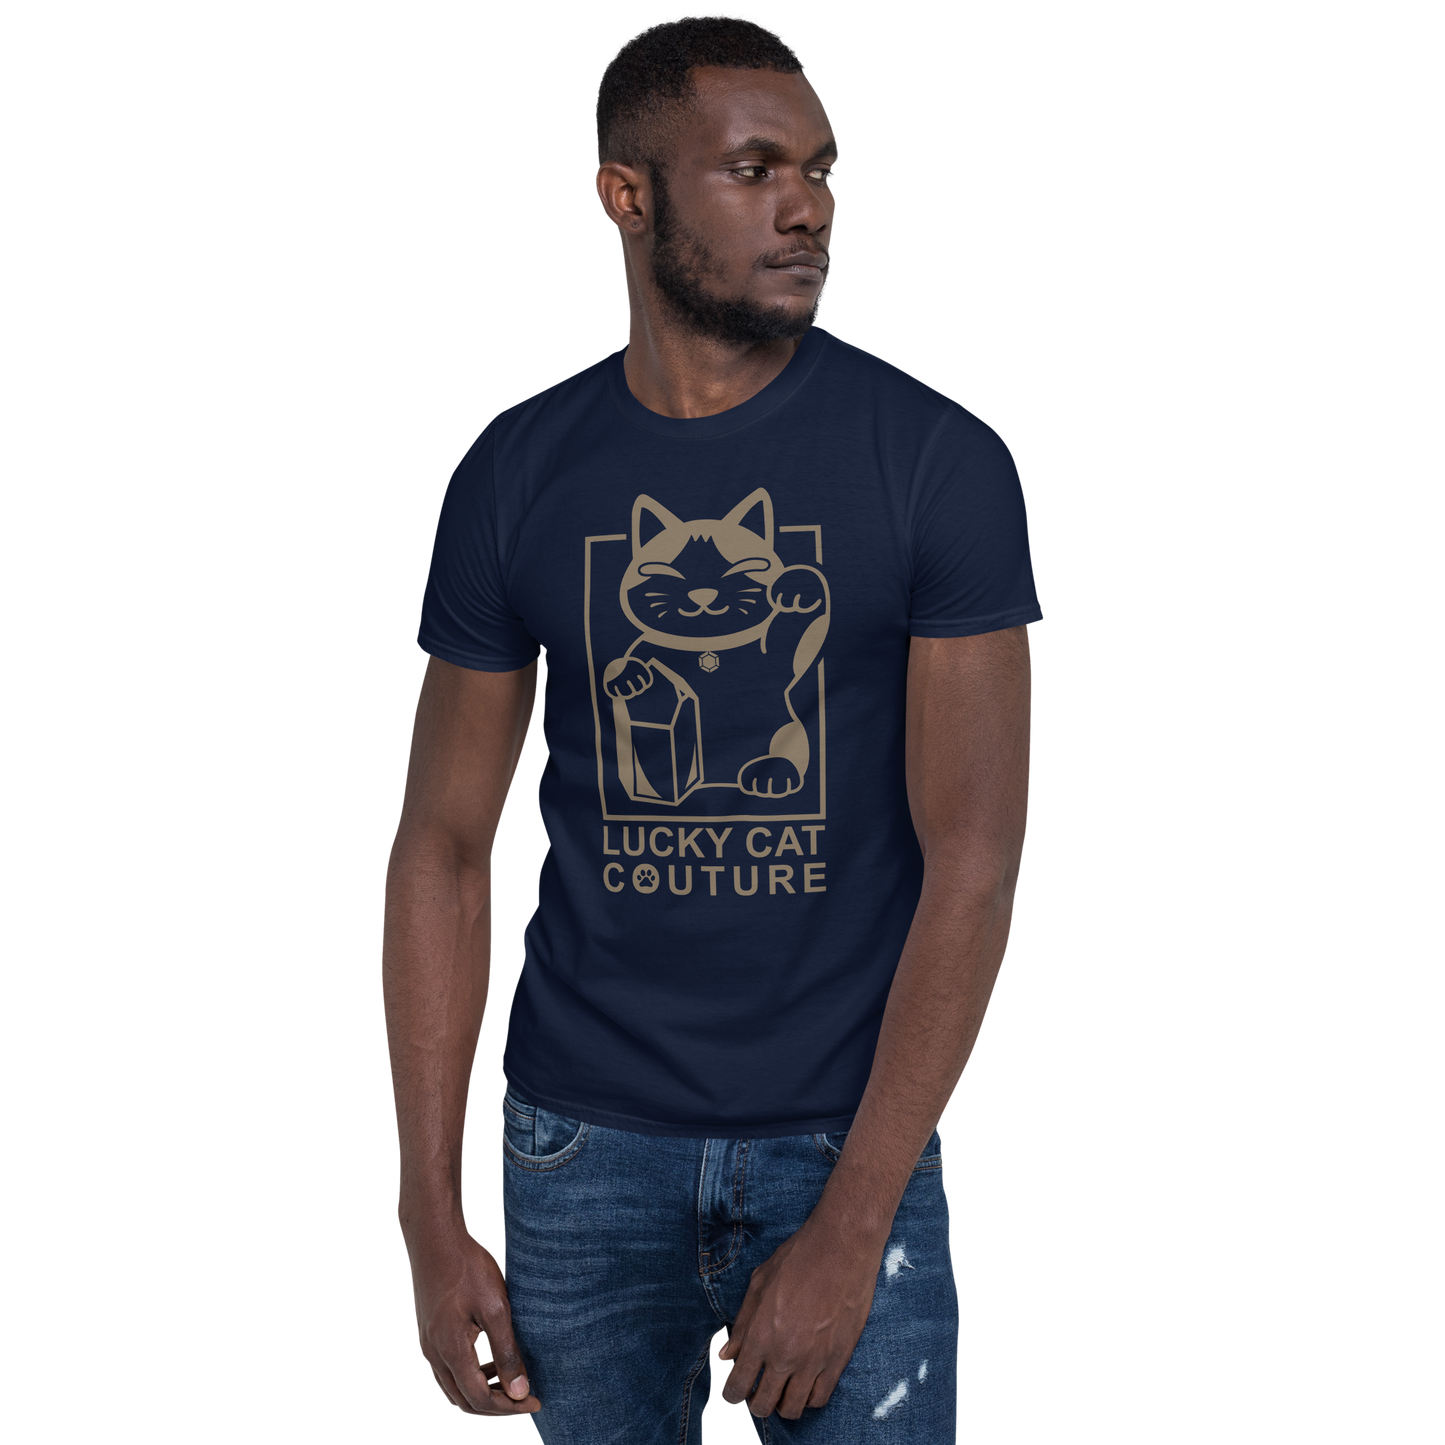 Navy Blue Lucky Cat Couture Tee